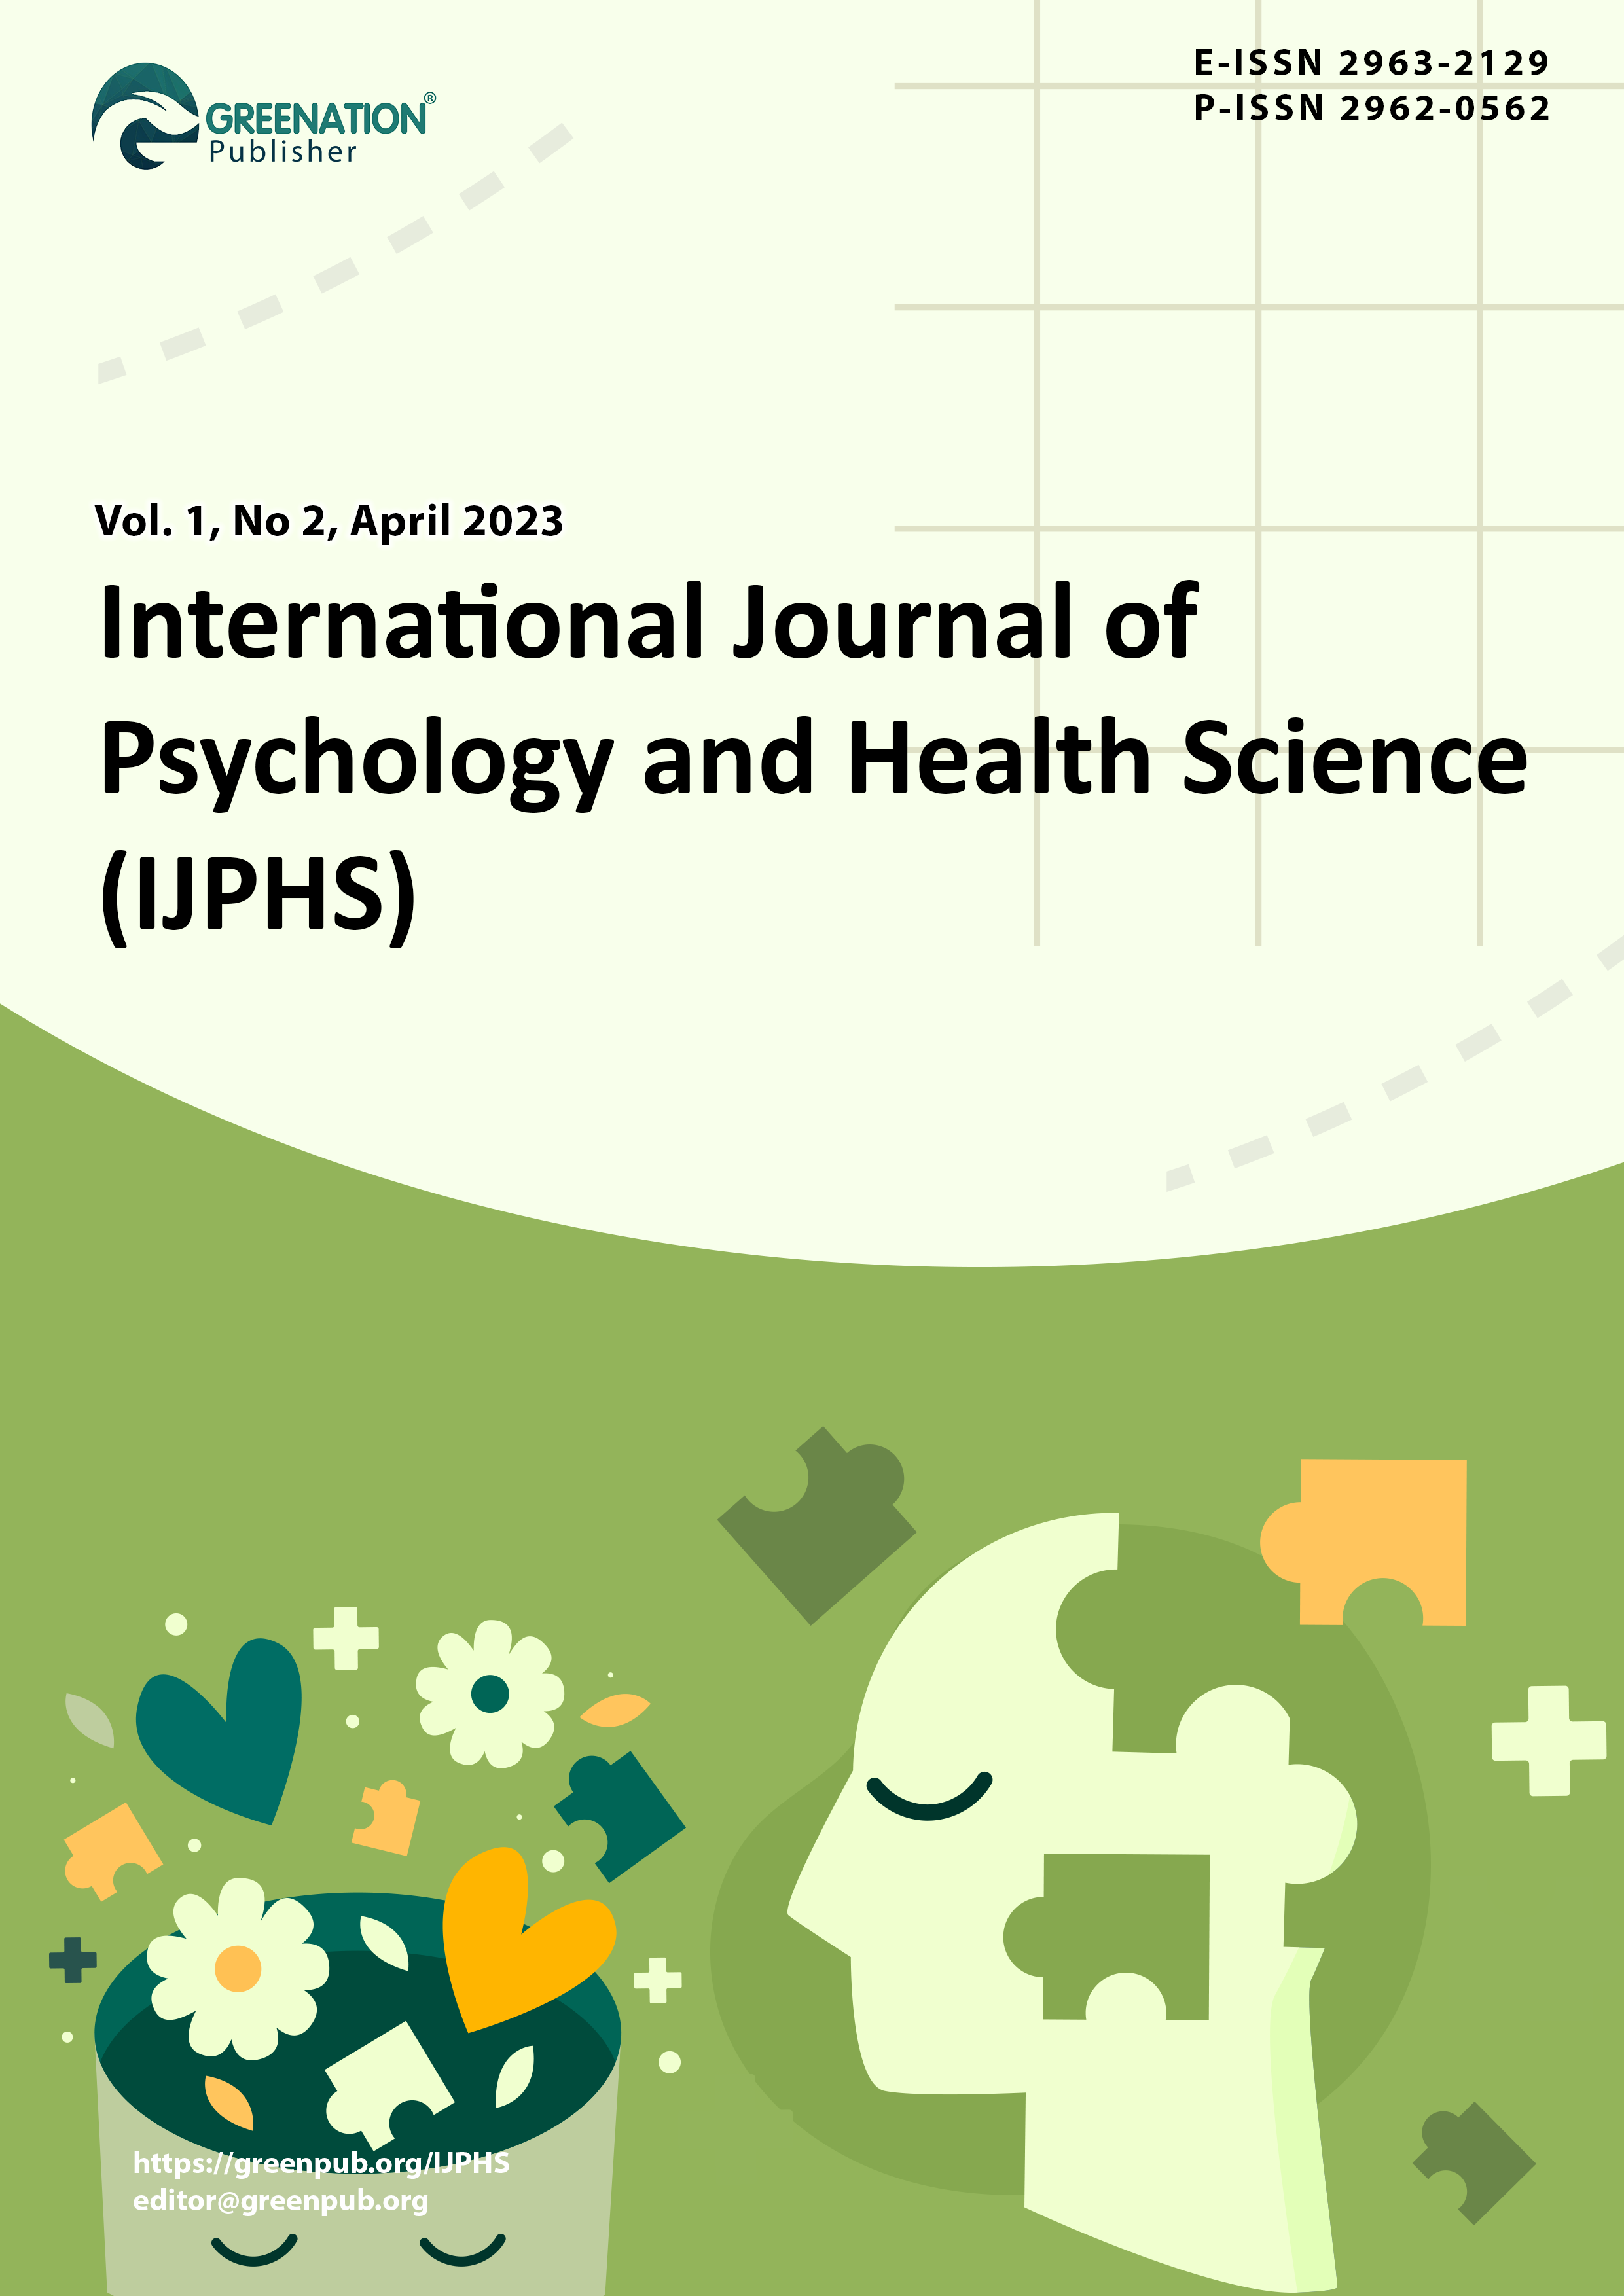 					View Vol. 1 No. 2 (2023): International Journal of Psychology and Health Science (April-June 2023)
				